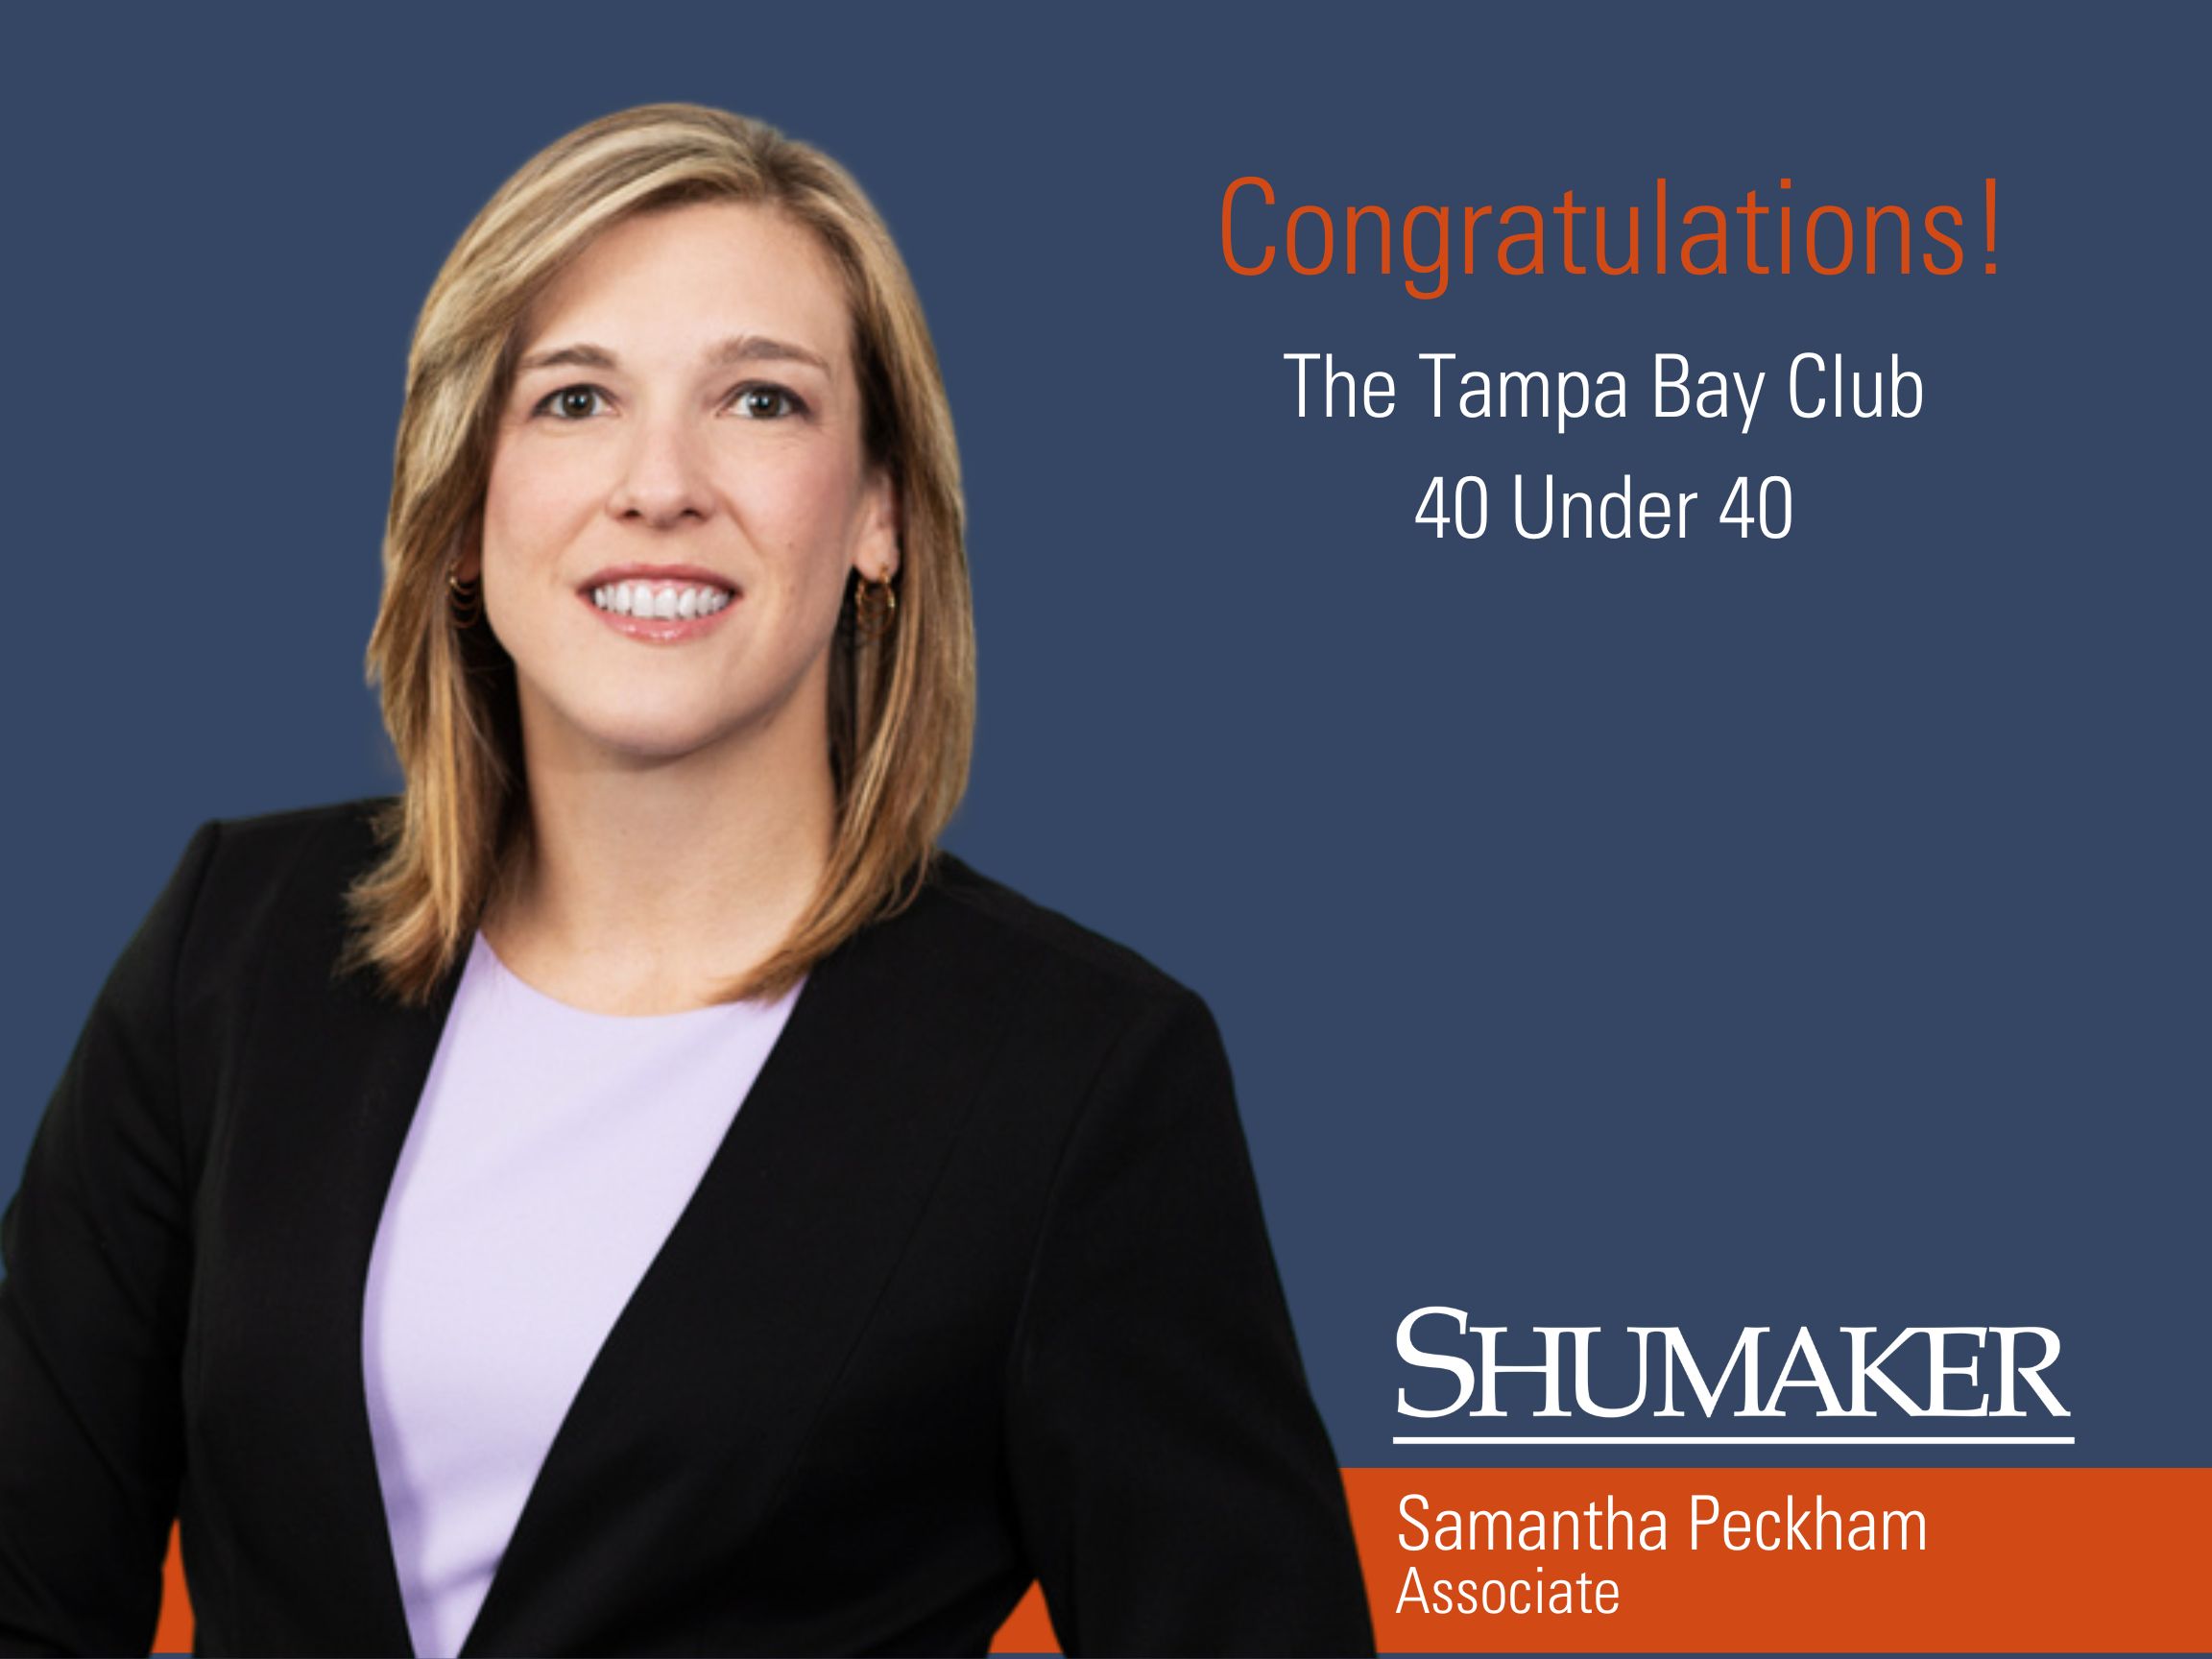 Samantha R. Peckham Named to The Tampa Bay Club 40 Under 40 